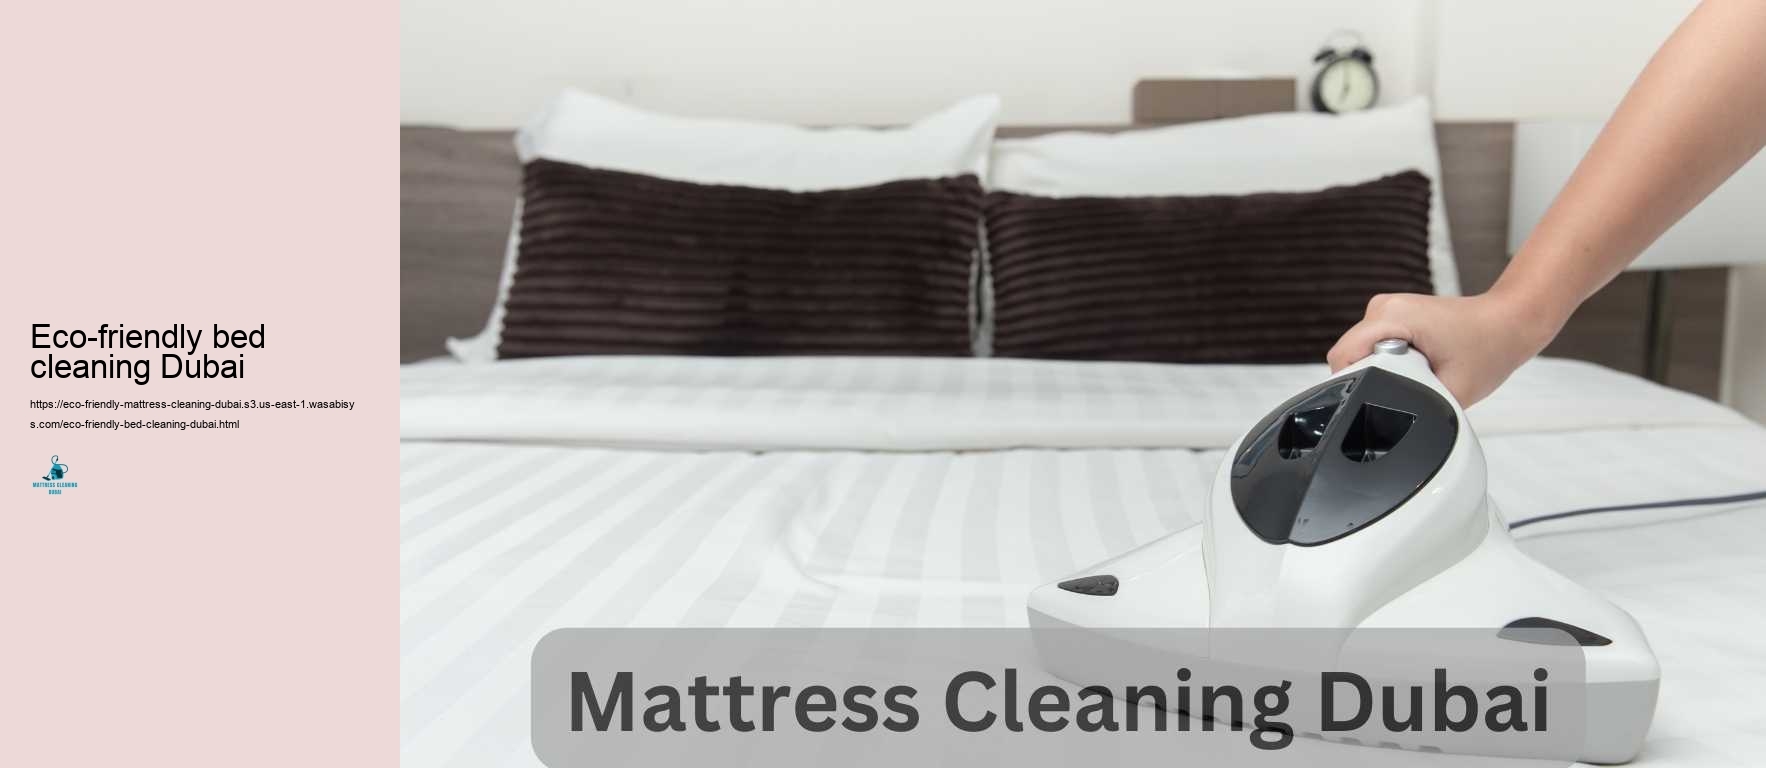 Eco-friendly bed cleaning Dubai